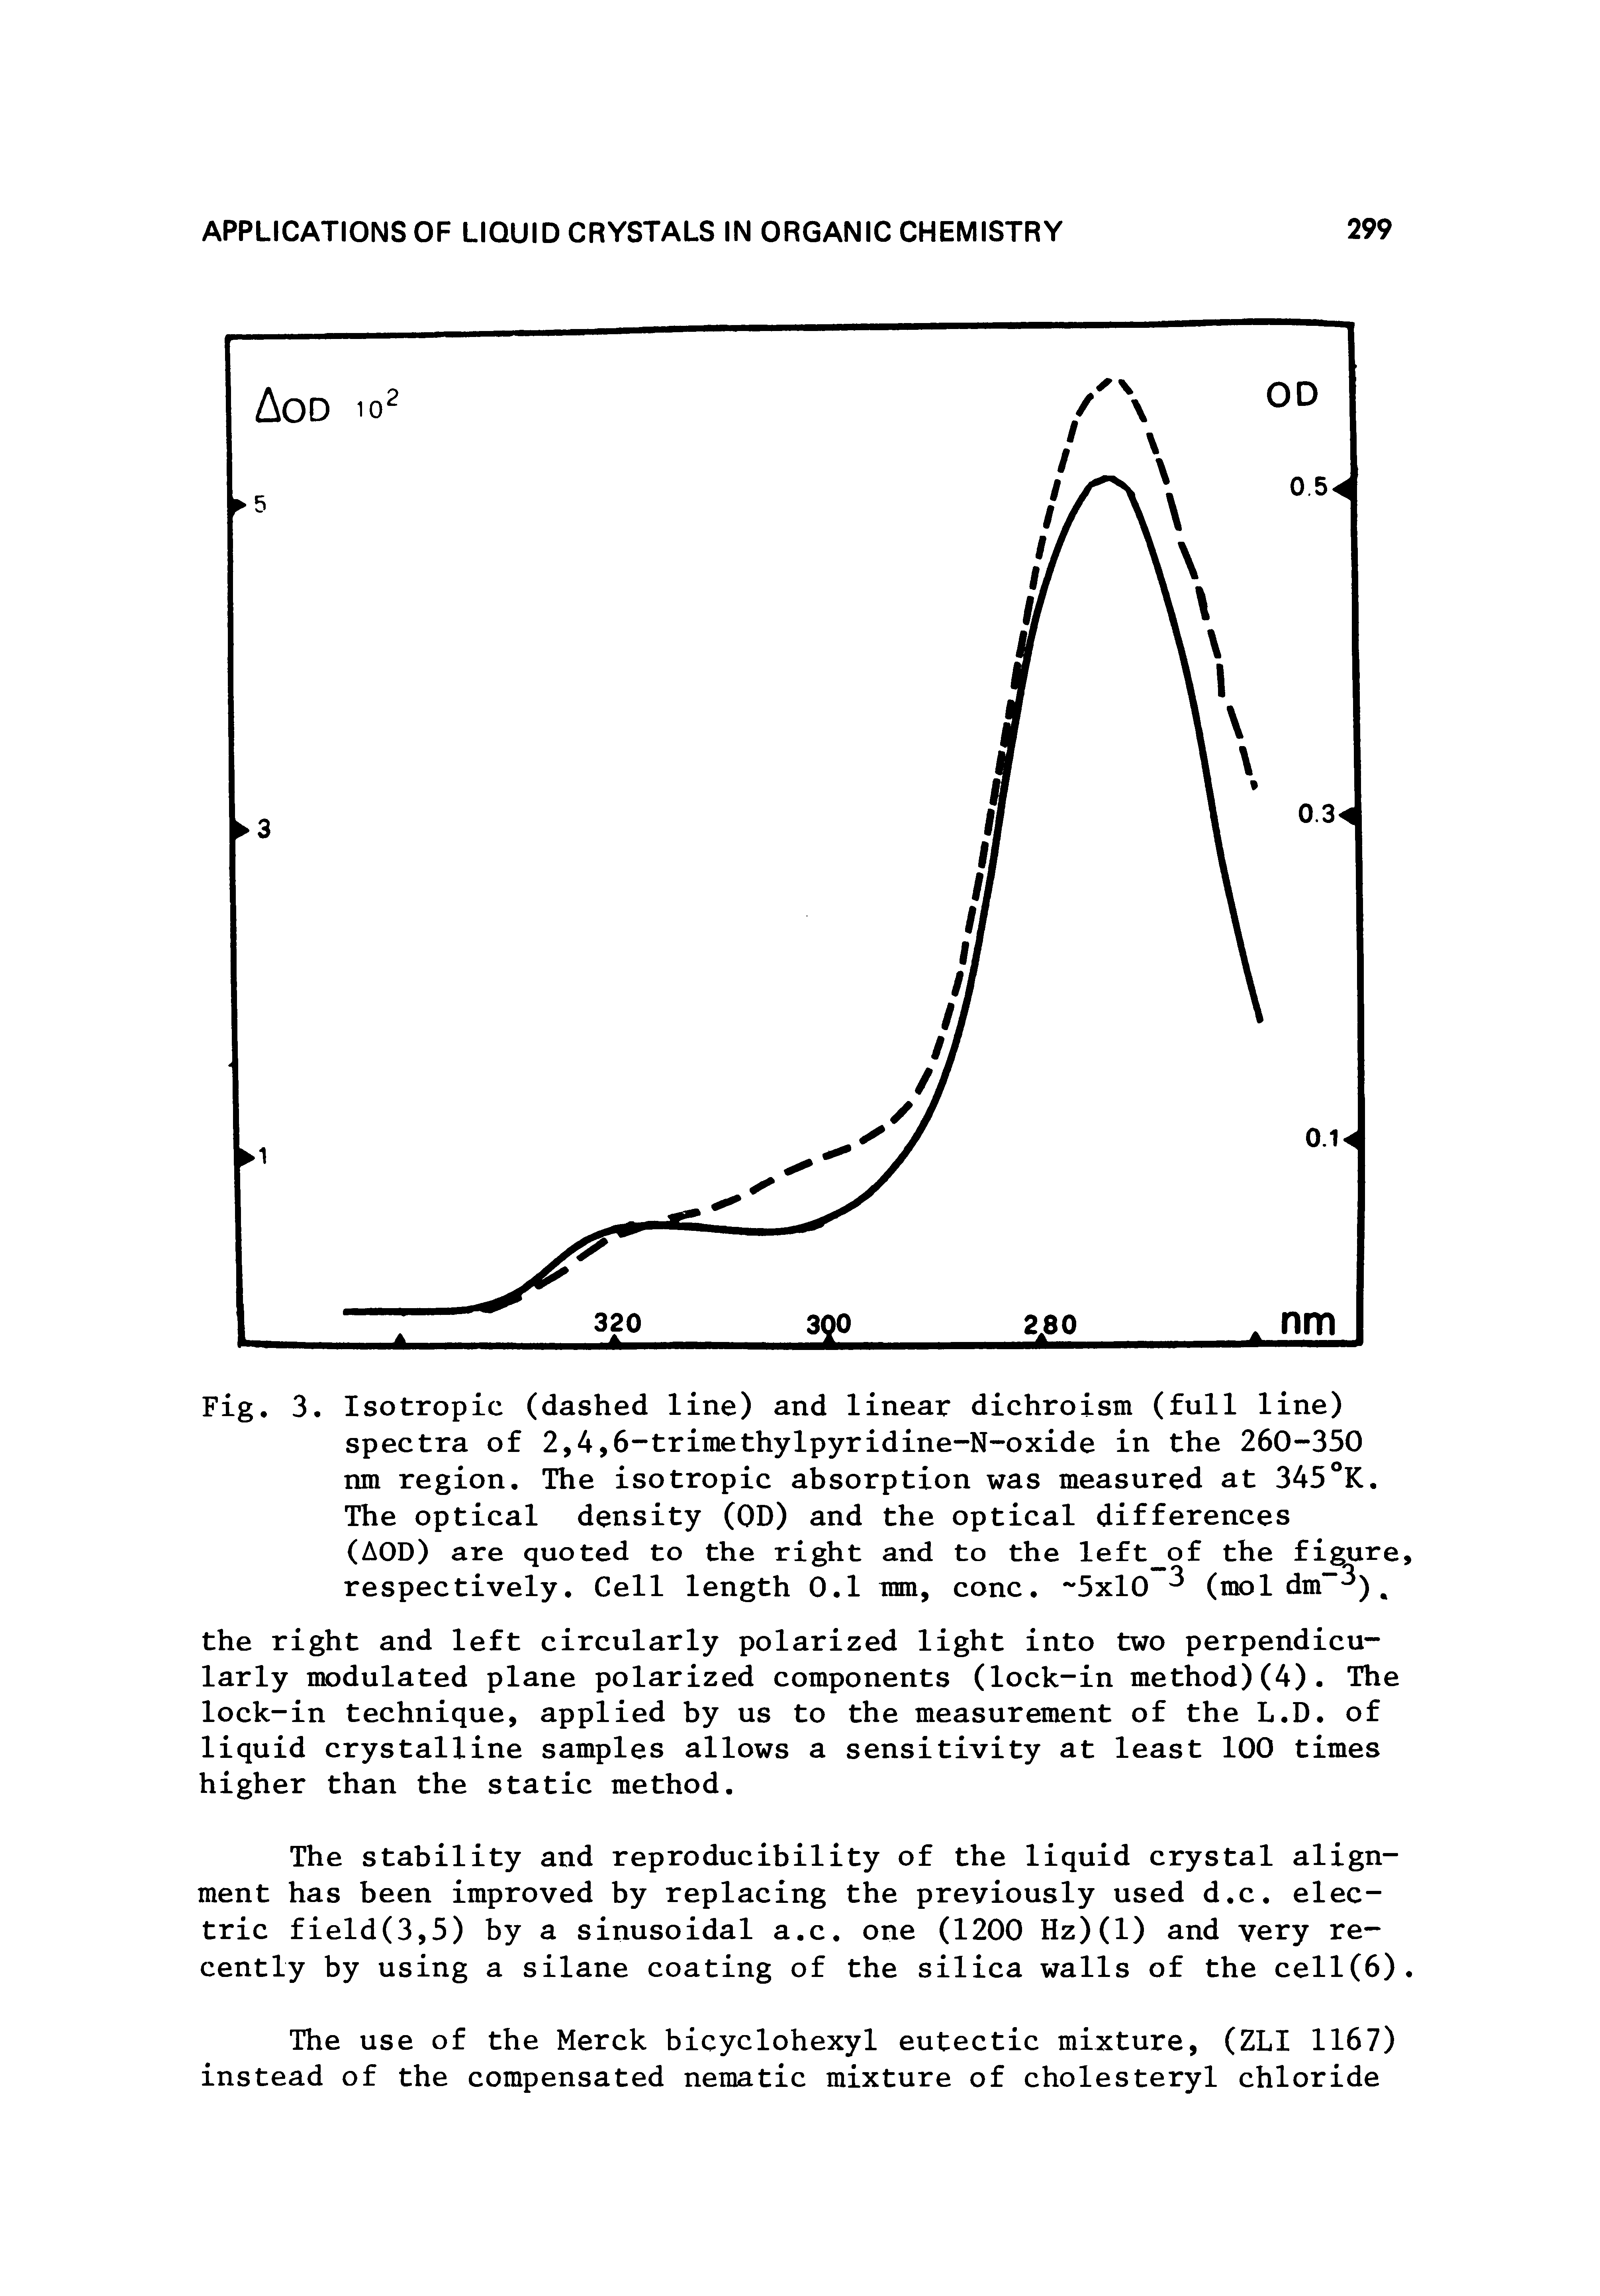 Fig. 3. Isotropic (dashed line) and linear dichroism (full line) spectra of 2,4,6-trimethylpyridine-N-oxide in the 260-350 nm region. The isotropic absorption was measured at 345 K. The optical density (OD) and the optical differences (AOD) are quoted to the right and to the left of the figure, respectively. Cell length 0.1 inm, cone. 5xl0 (mol dm ),...